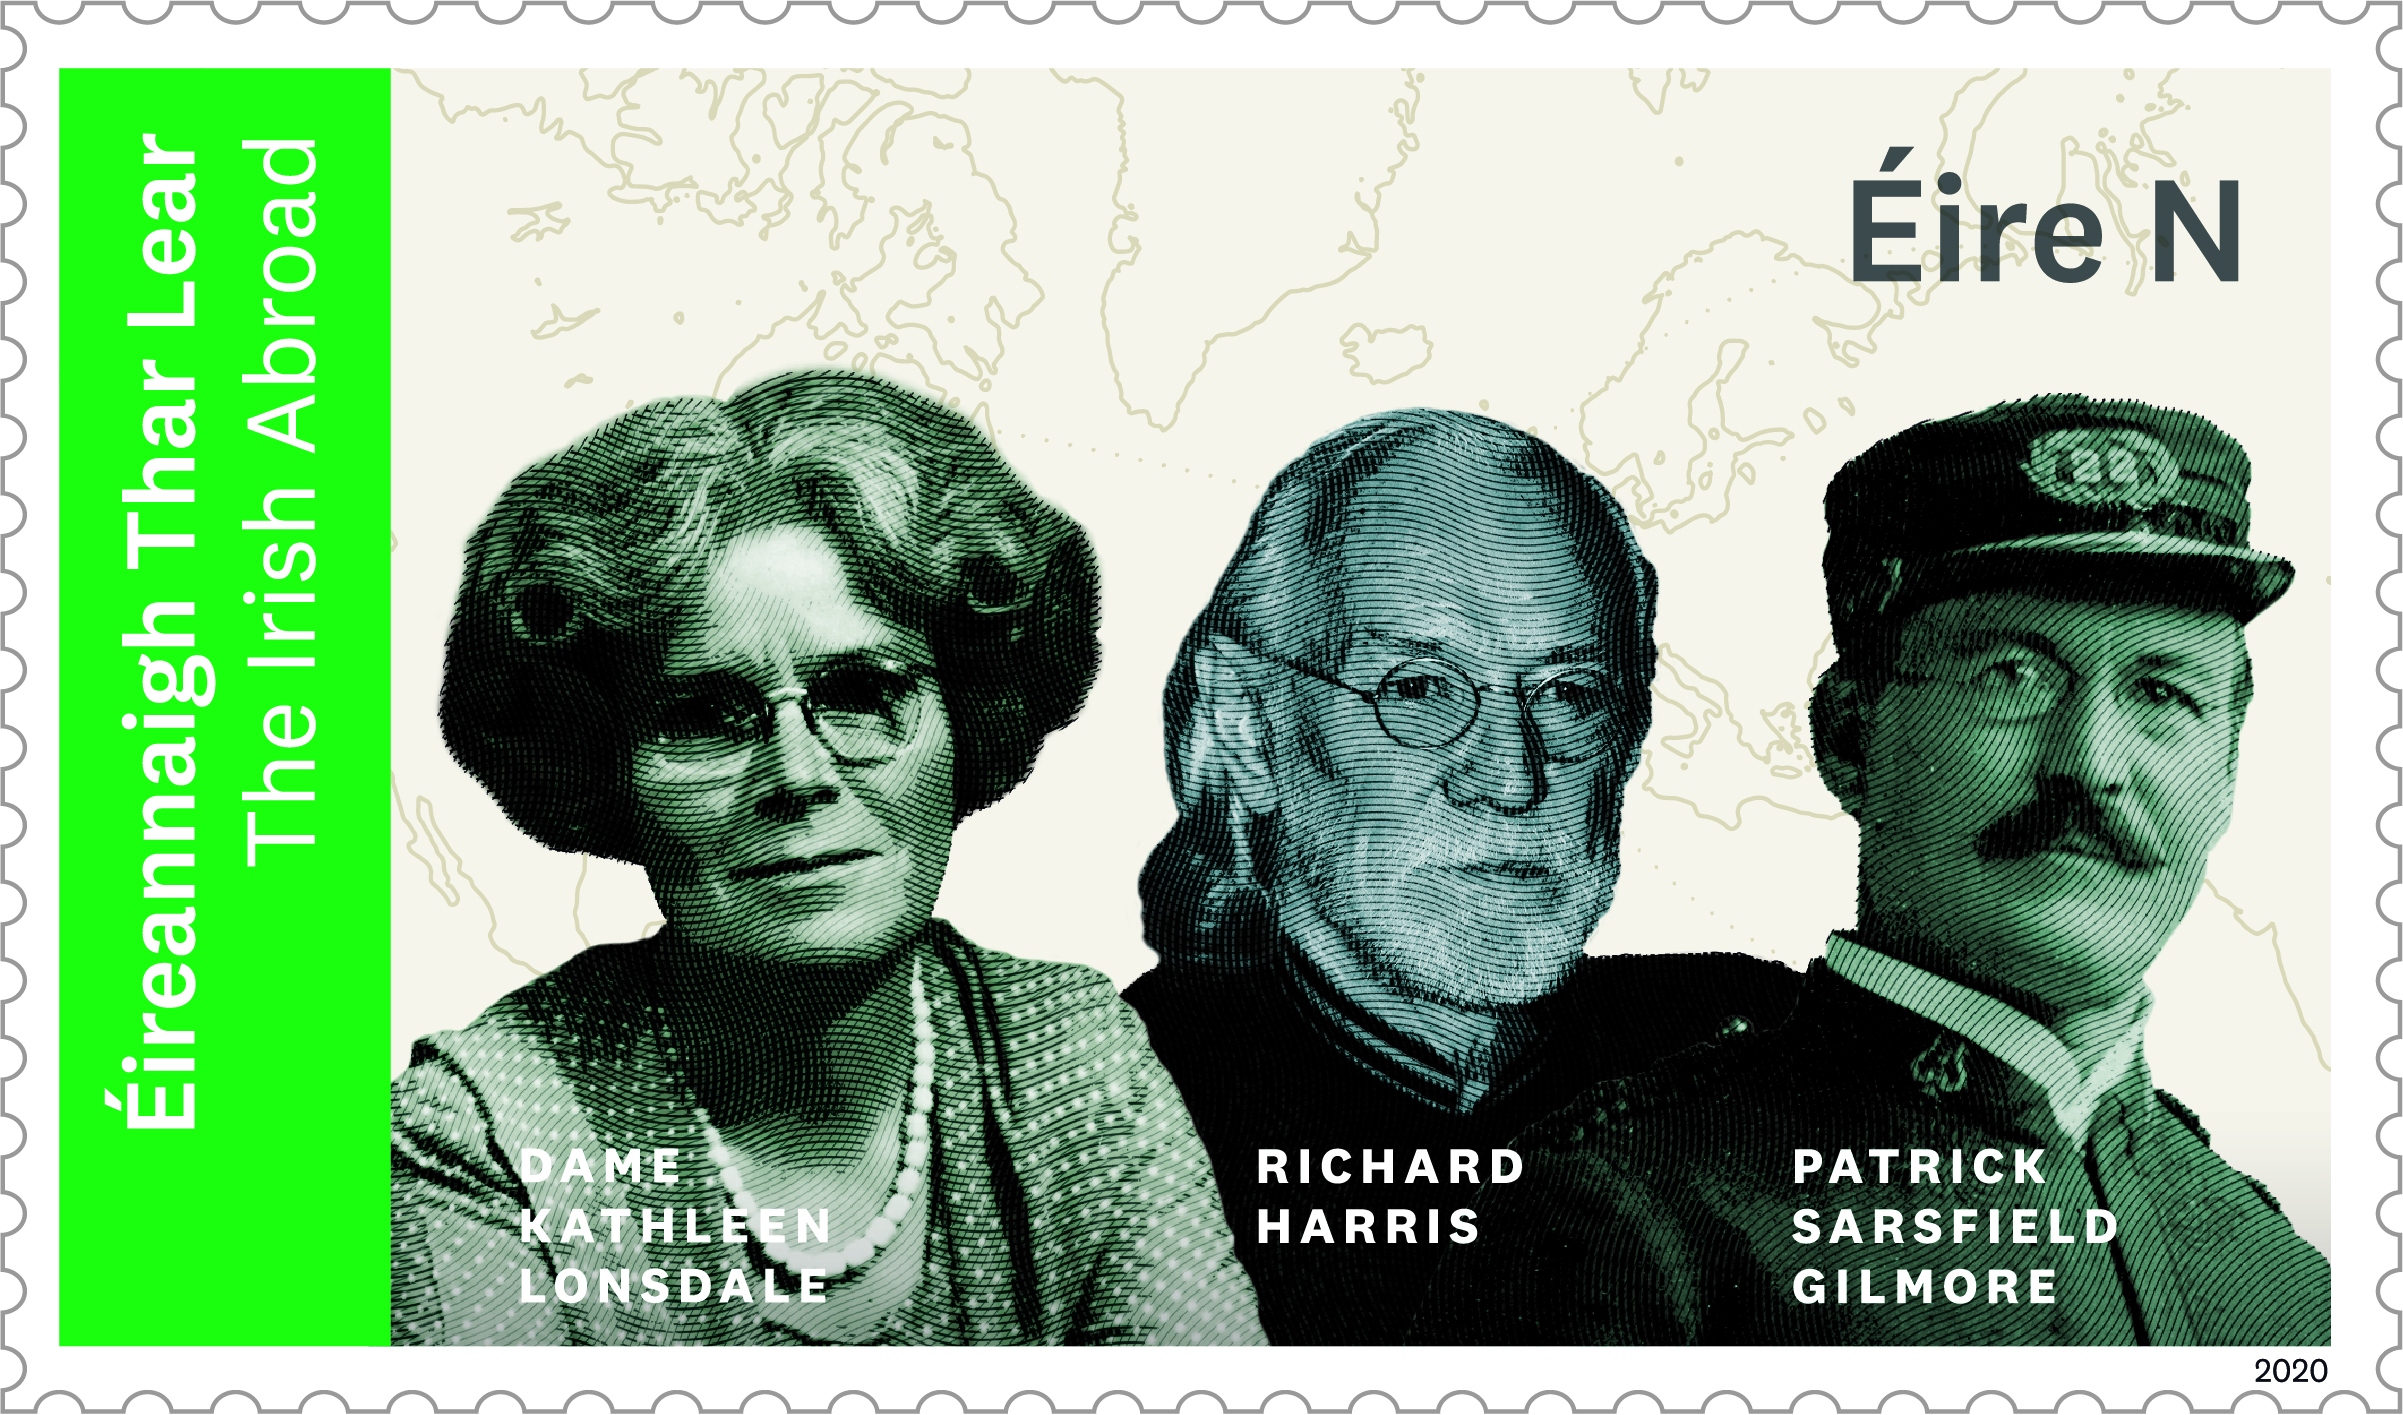 An Post 2020 special edition diaspora postage stamp depicting Dame Kathleen Lonsdale, Richard Harris and Patrick Sarsfield Gilmore 